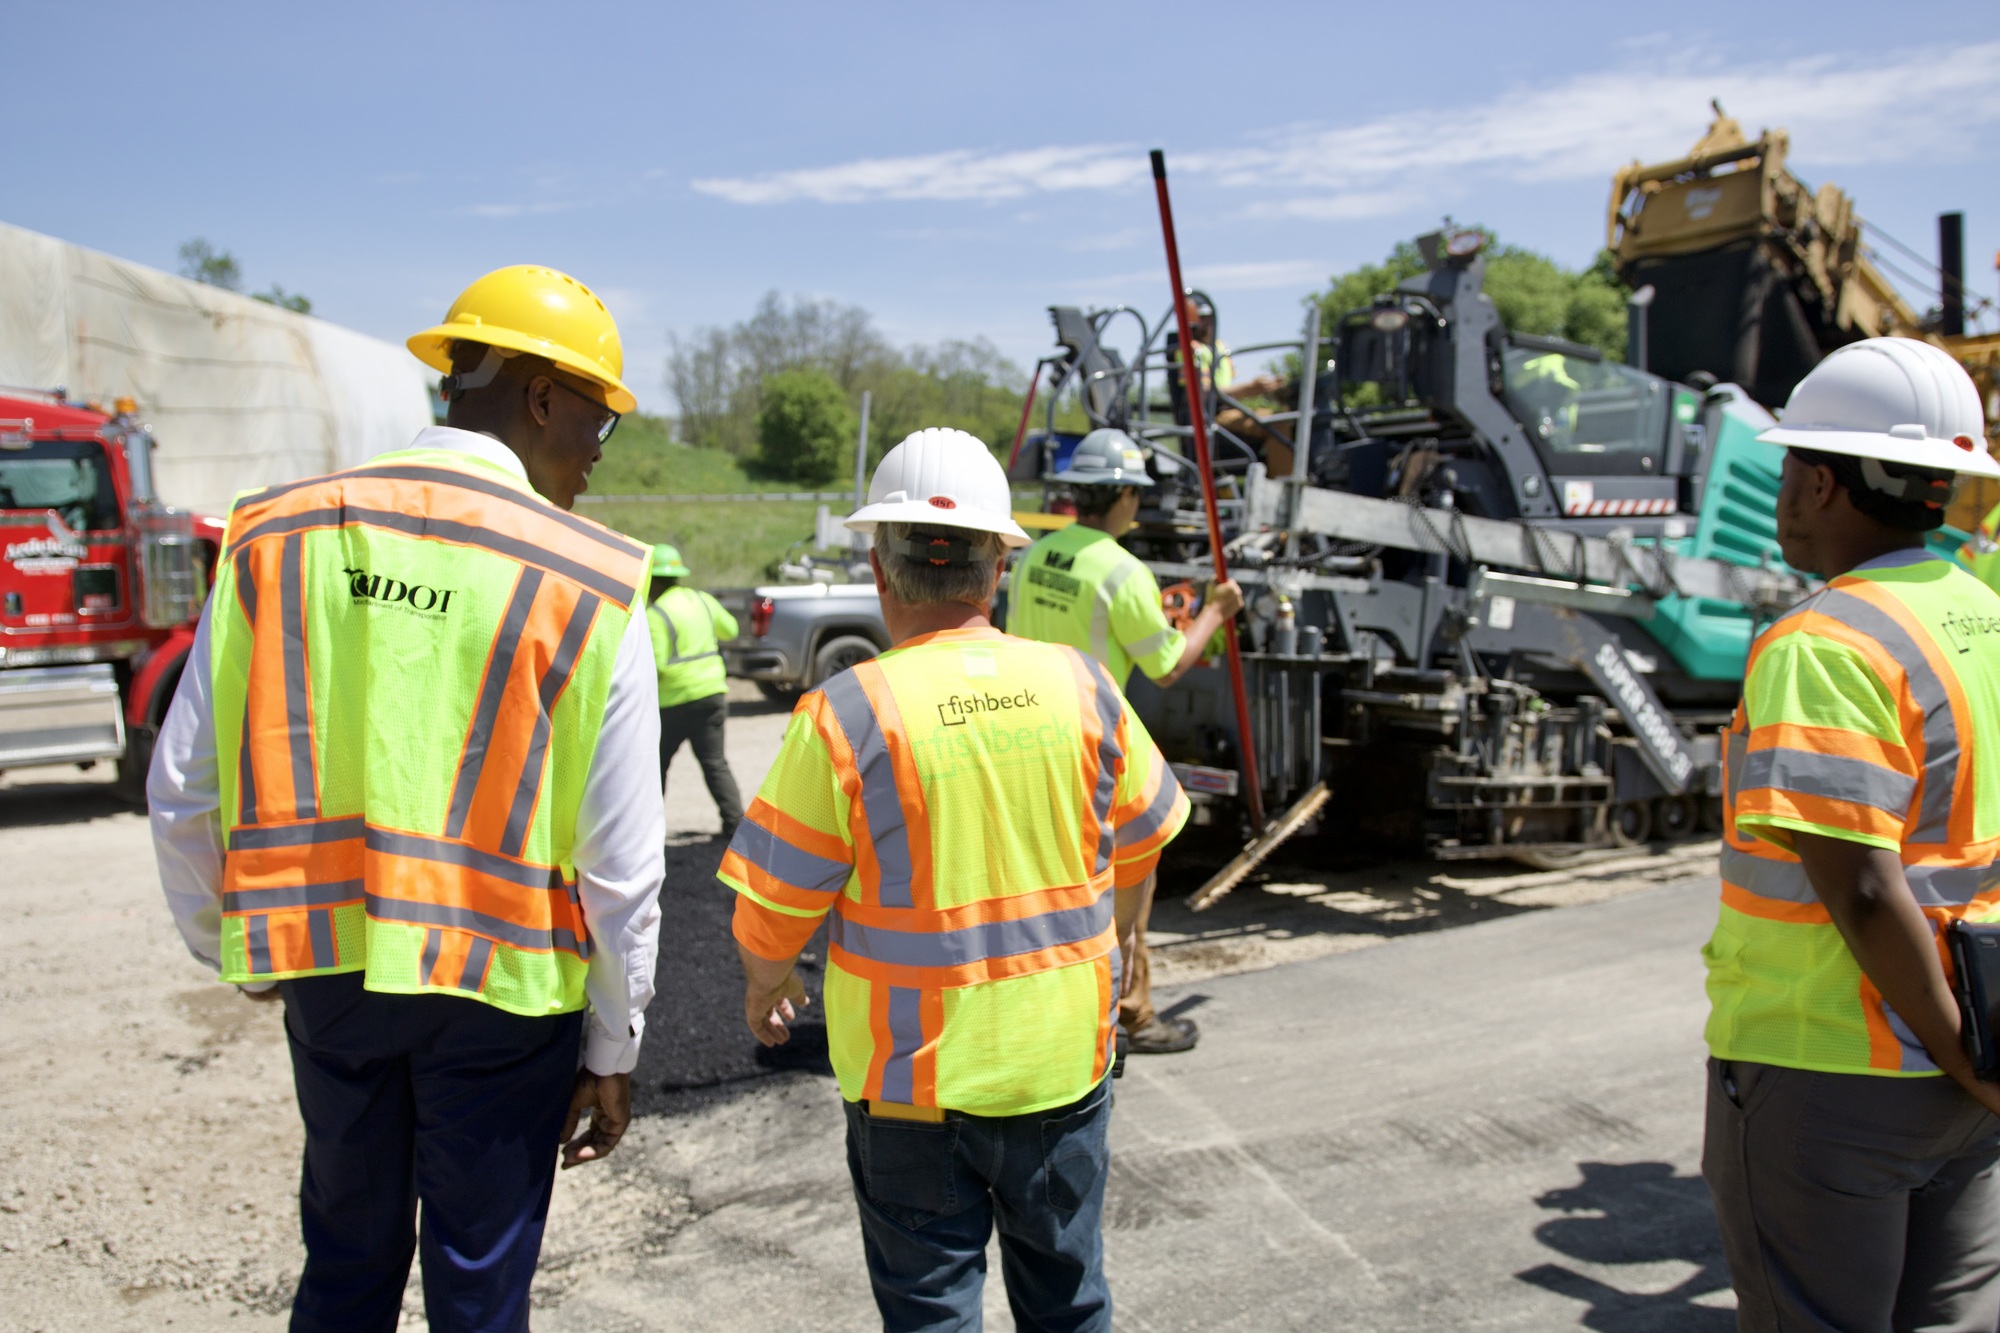 Lt. Governor talks to road crew during visit to view road repairs 